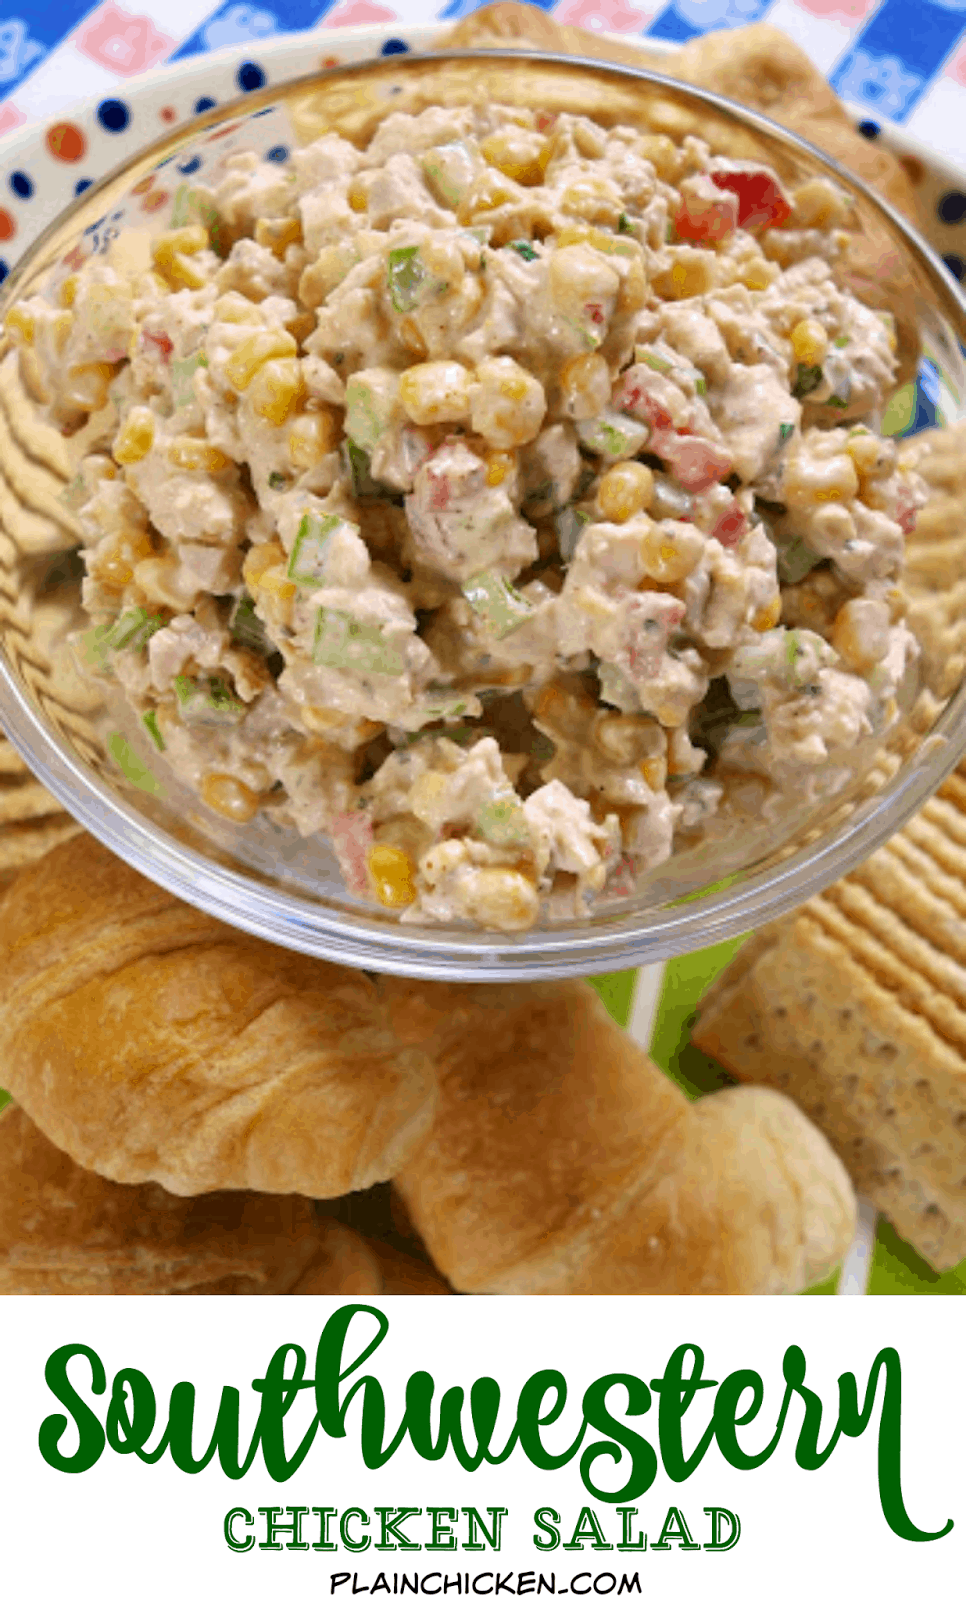 Southwestern Chicken Salad - chicken salad with lime juice, corn, green pepper, celery, tomatoes and cilantro - GREAT flavor! People always ask for the recipe!